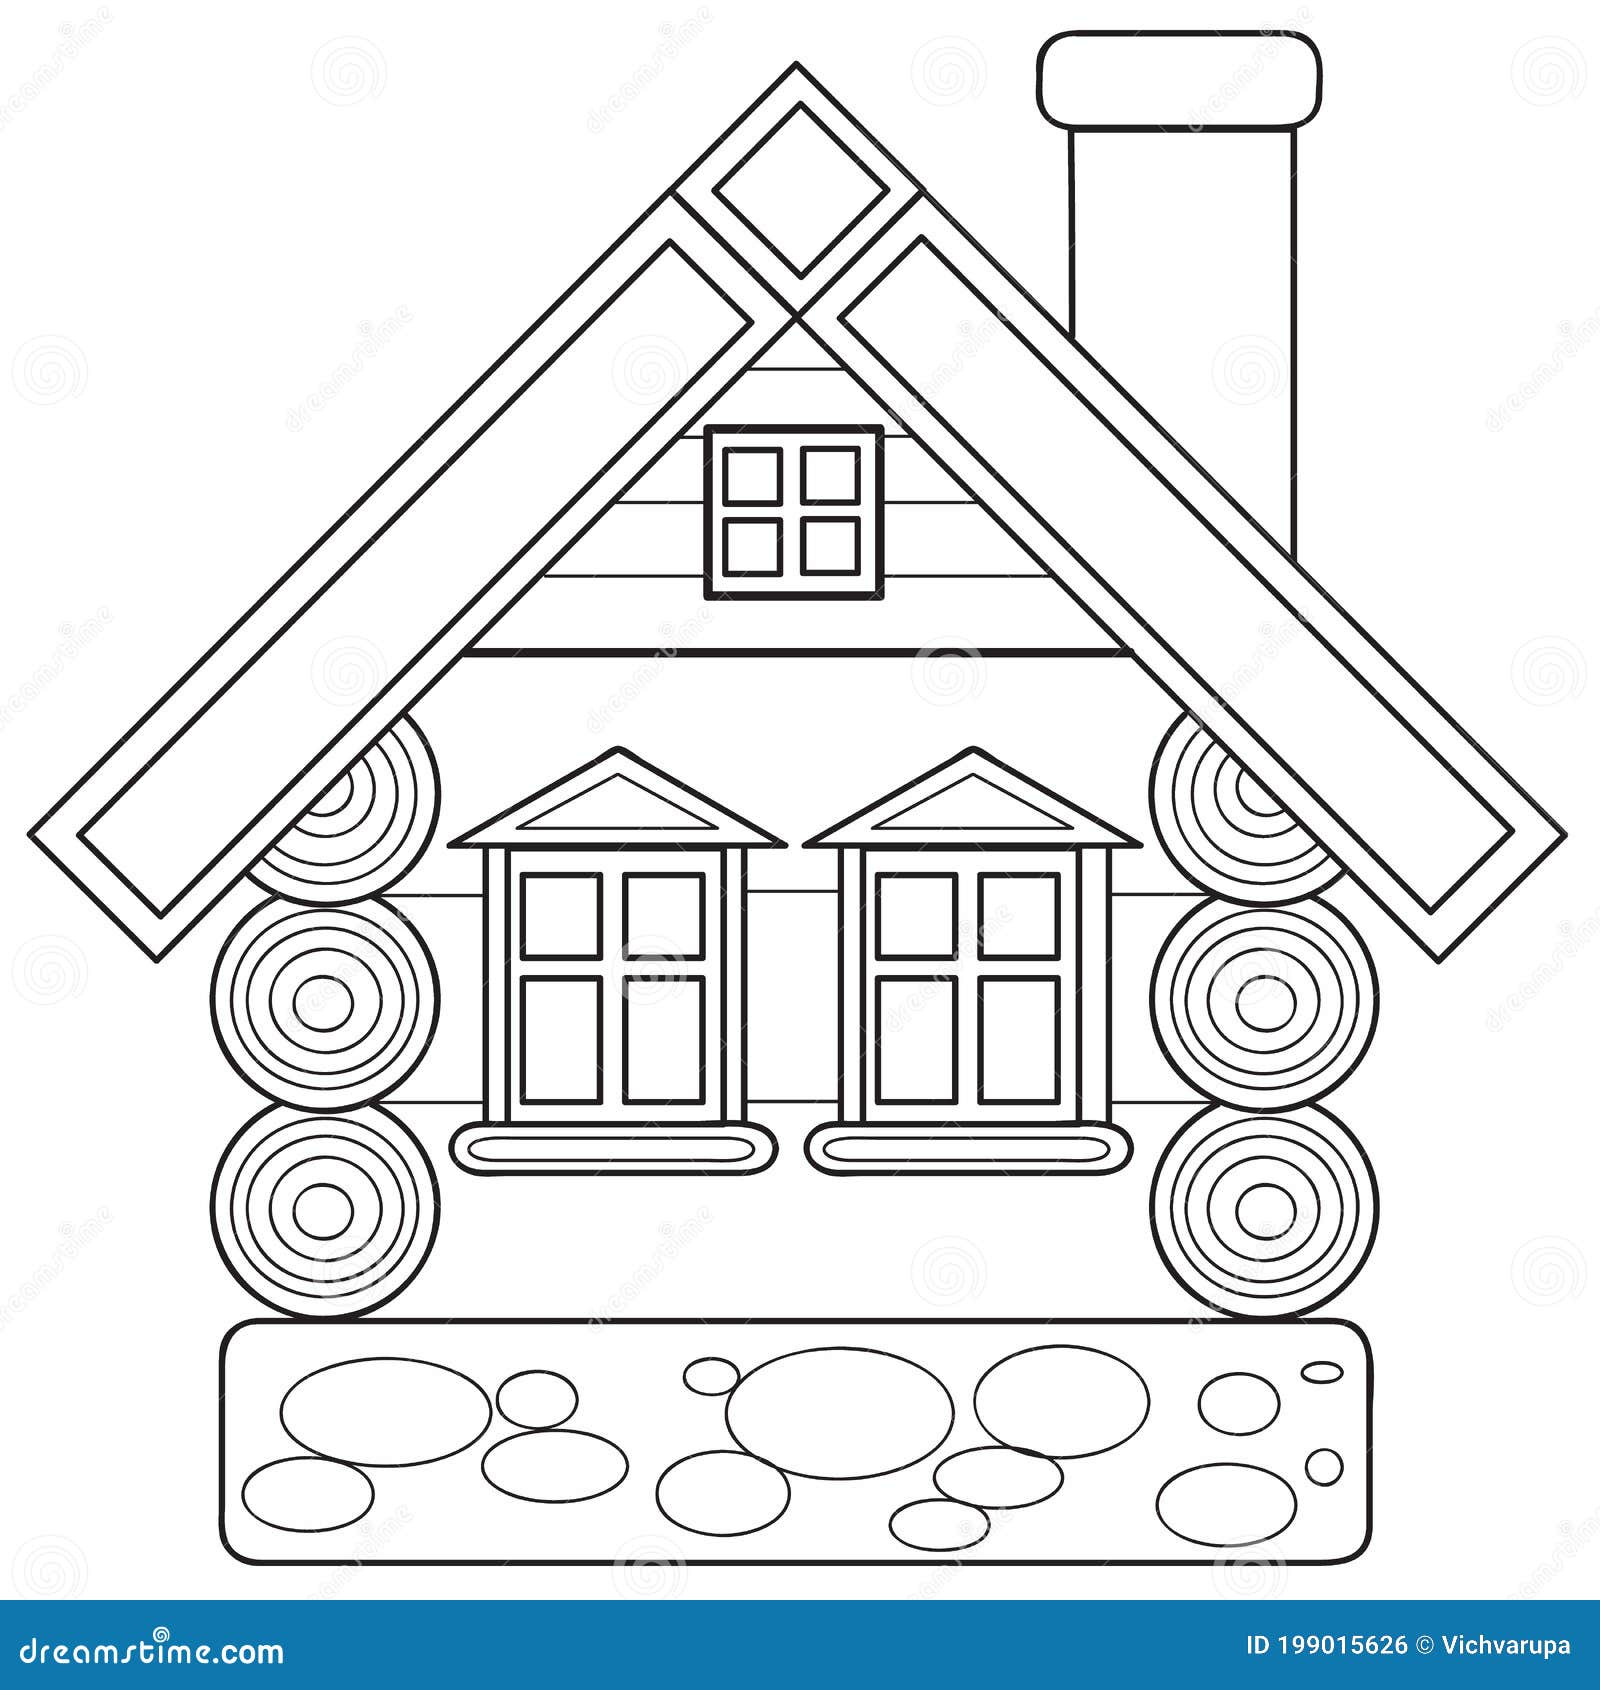 Sketch log house coloring book isolated object on white background cartoon illustration vector stock vector